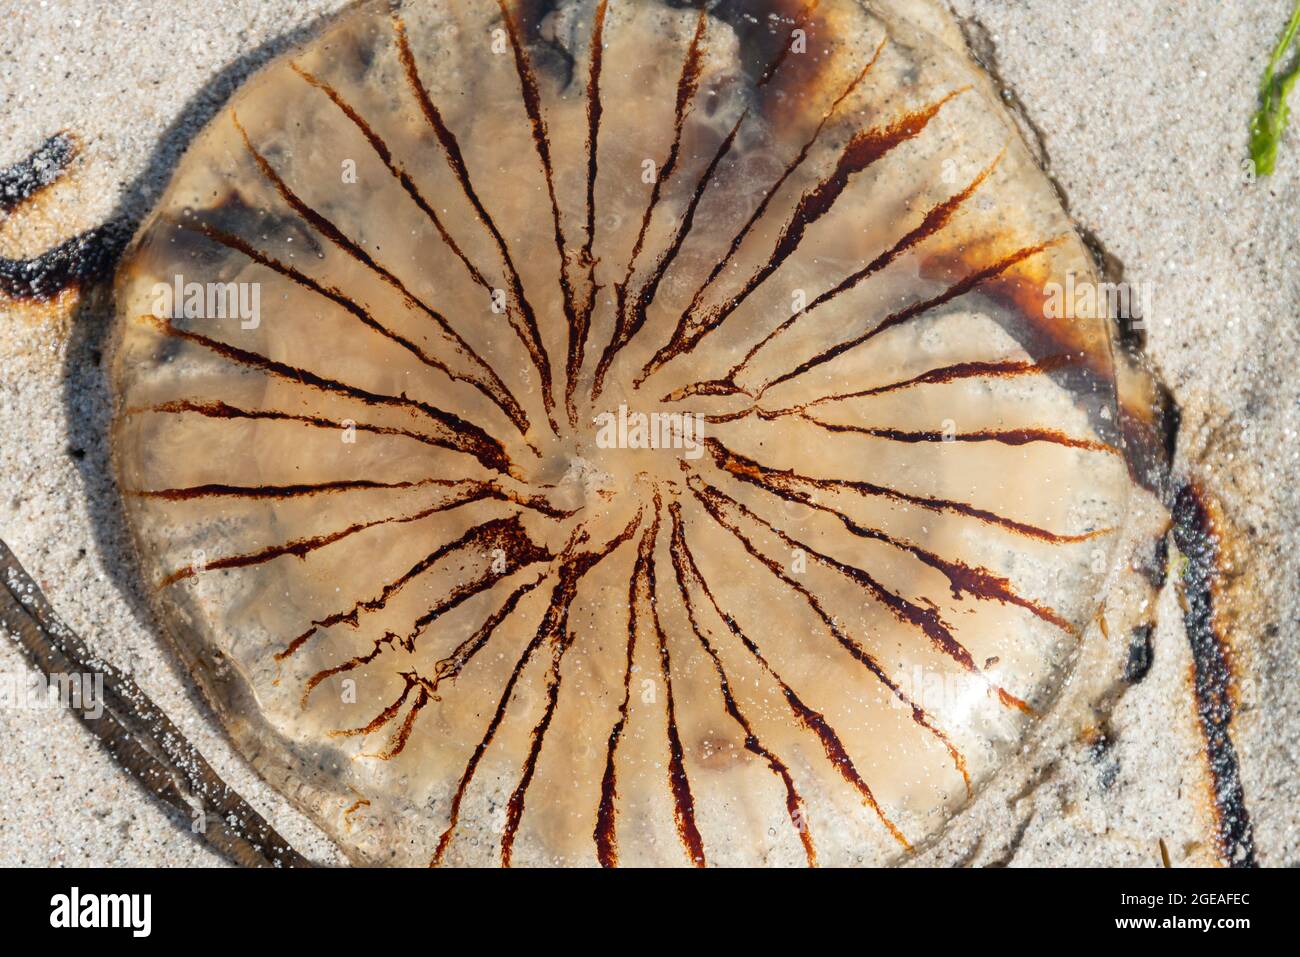 A compass jellyfish (Chrysaora hysoscella) washed up on Porthloo Beach, St Mary's, Isles of Scilly Stock Photo